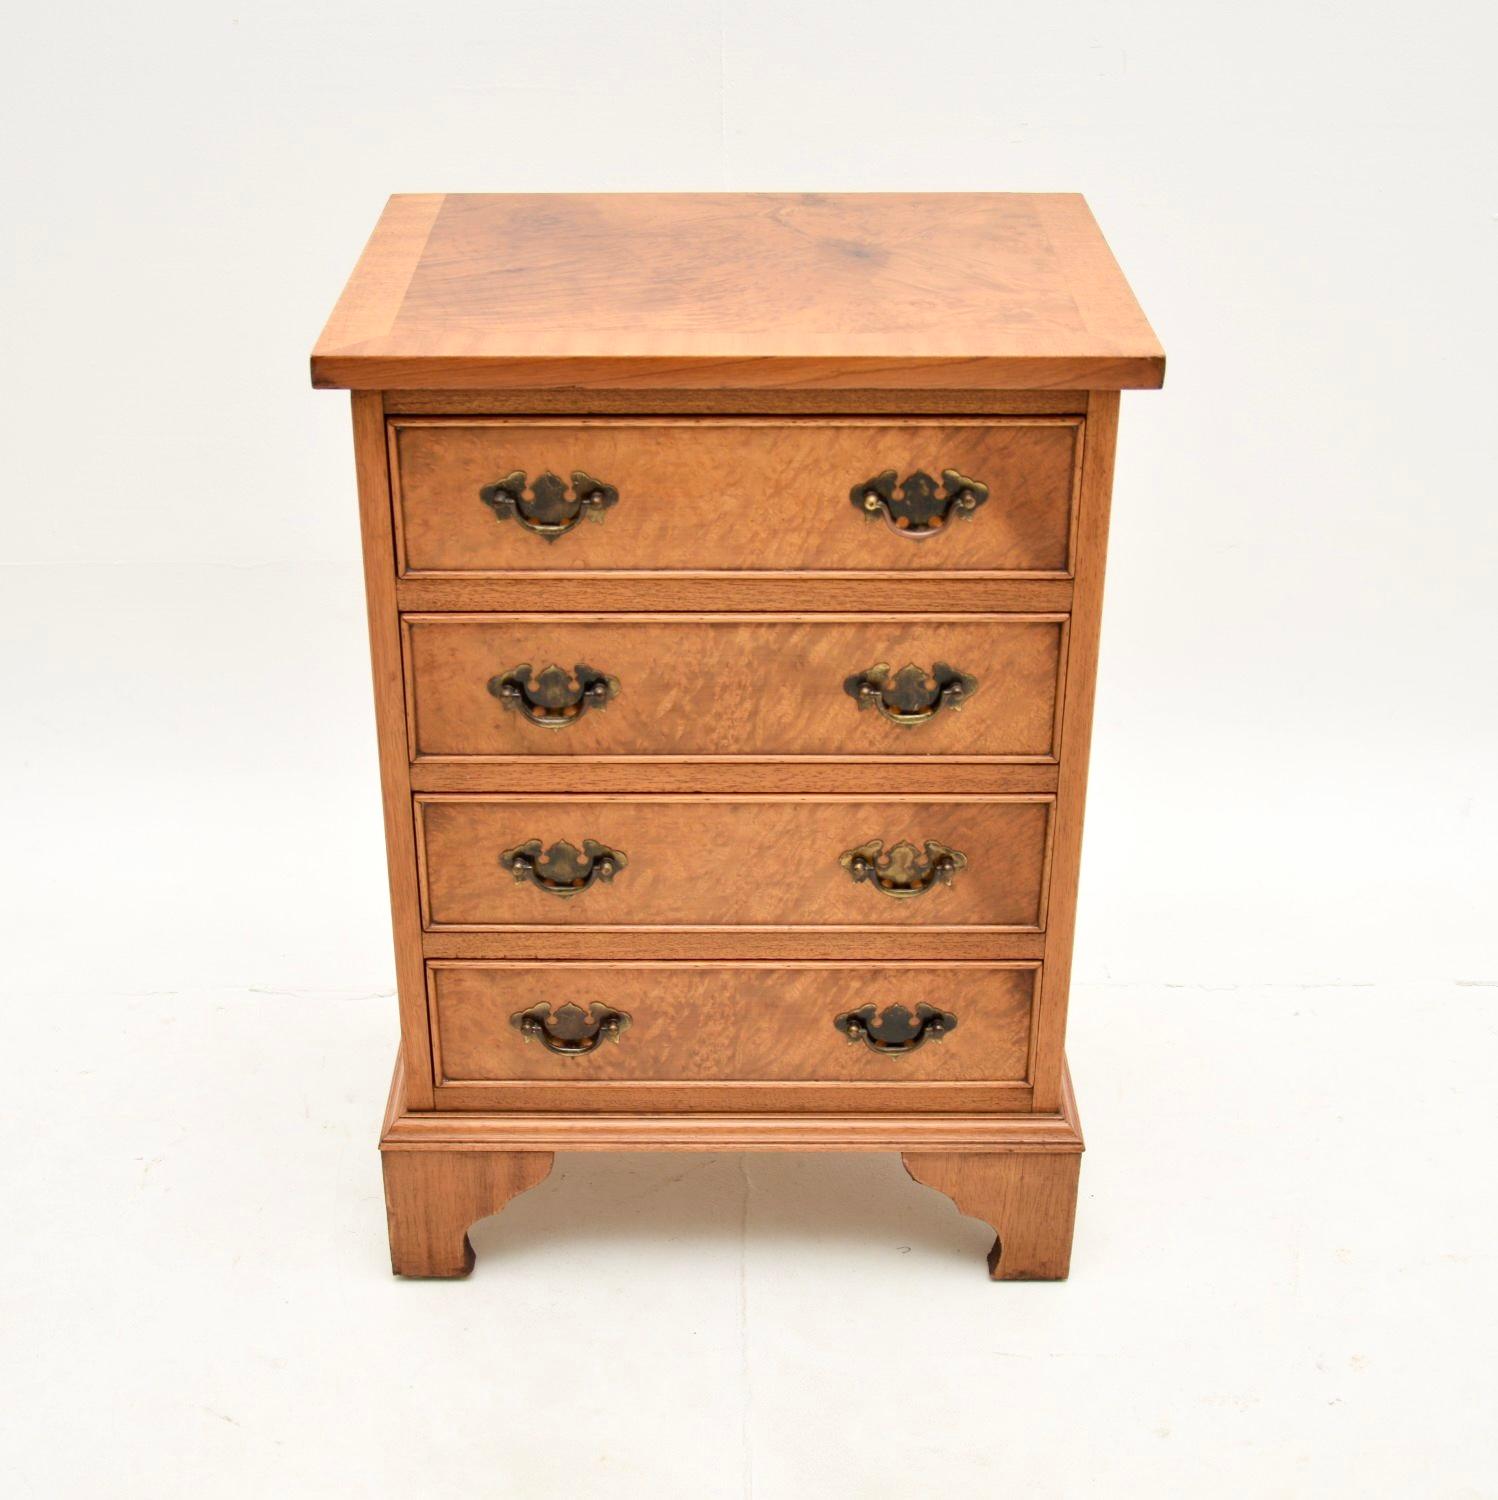 A beautiful little antique burr walnut chest of drawers in the Georgian style. This was made in England, it dates from around the 1950’s.

The quality is superb, this is of lovely proportions and has plenty of storage space. It sits on bracket feet,